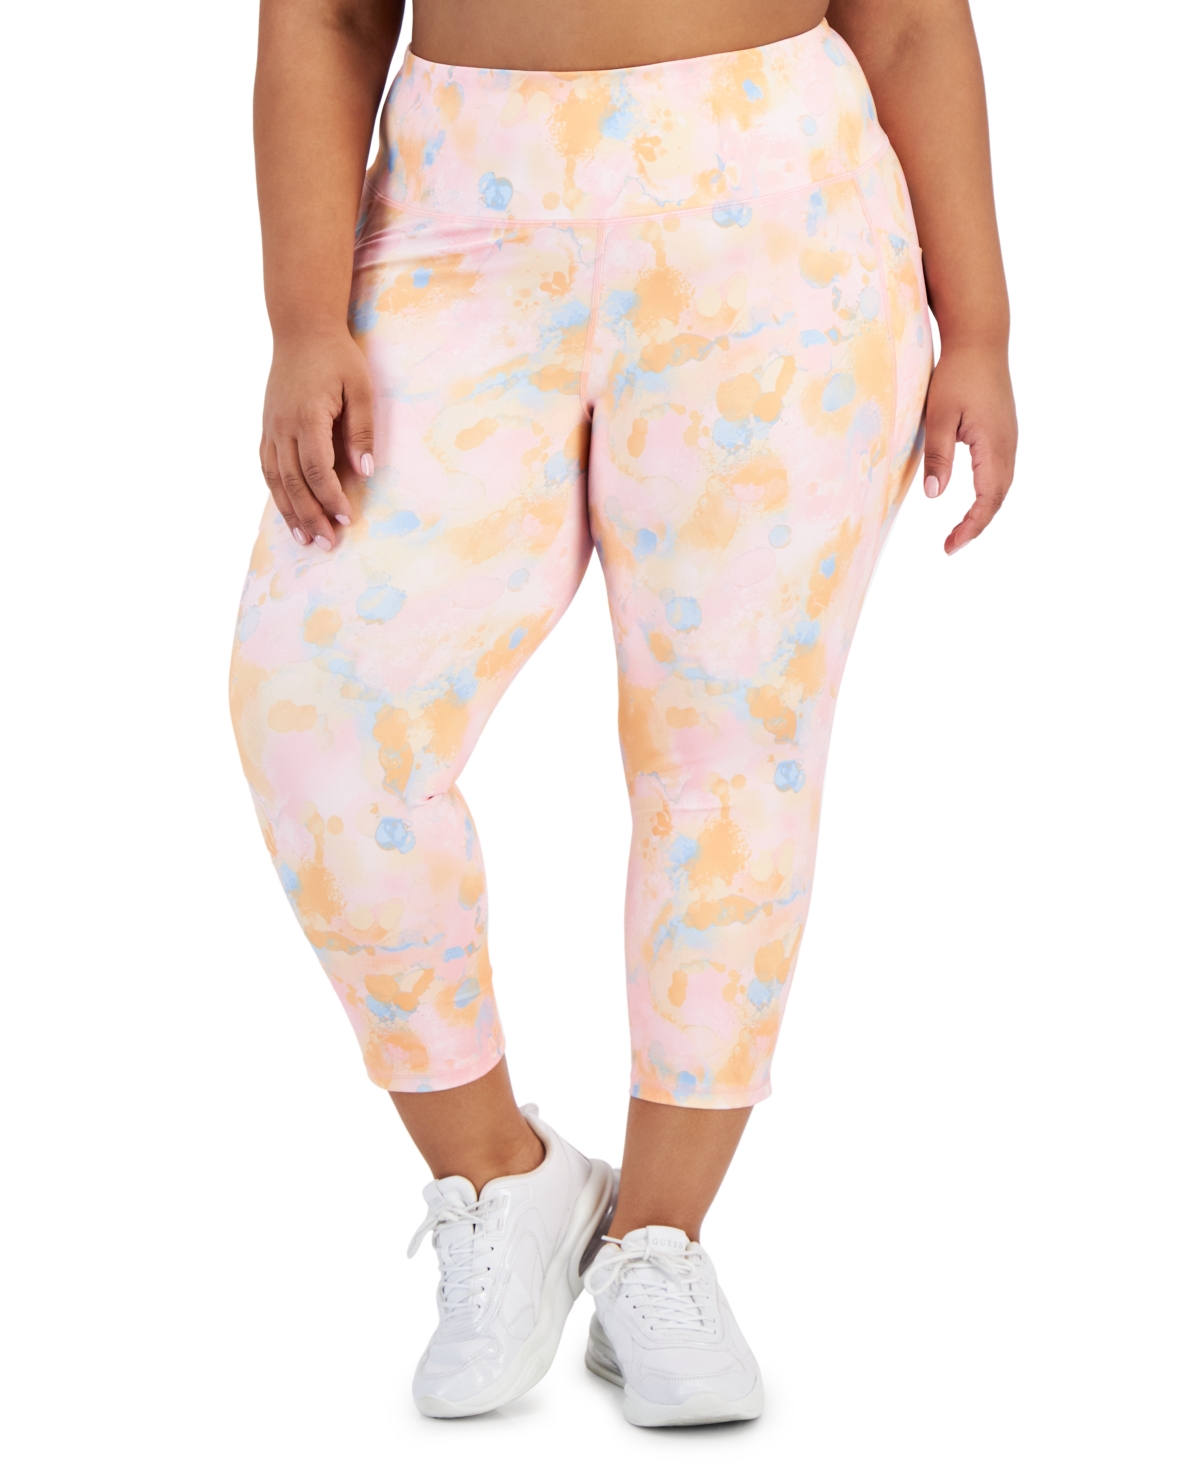 Women's Plus Size Dreamy Bubble-Print Cropped Compression Leggings, Created for Macy's - Pink Icing